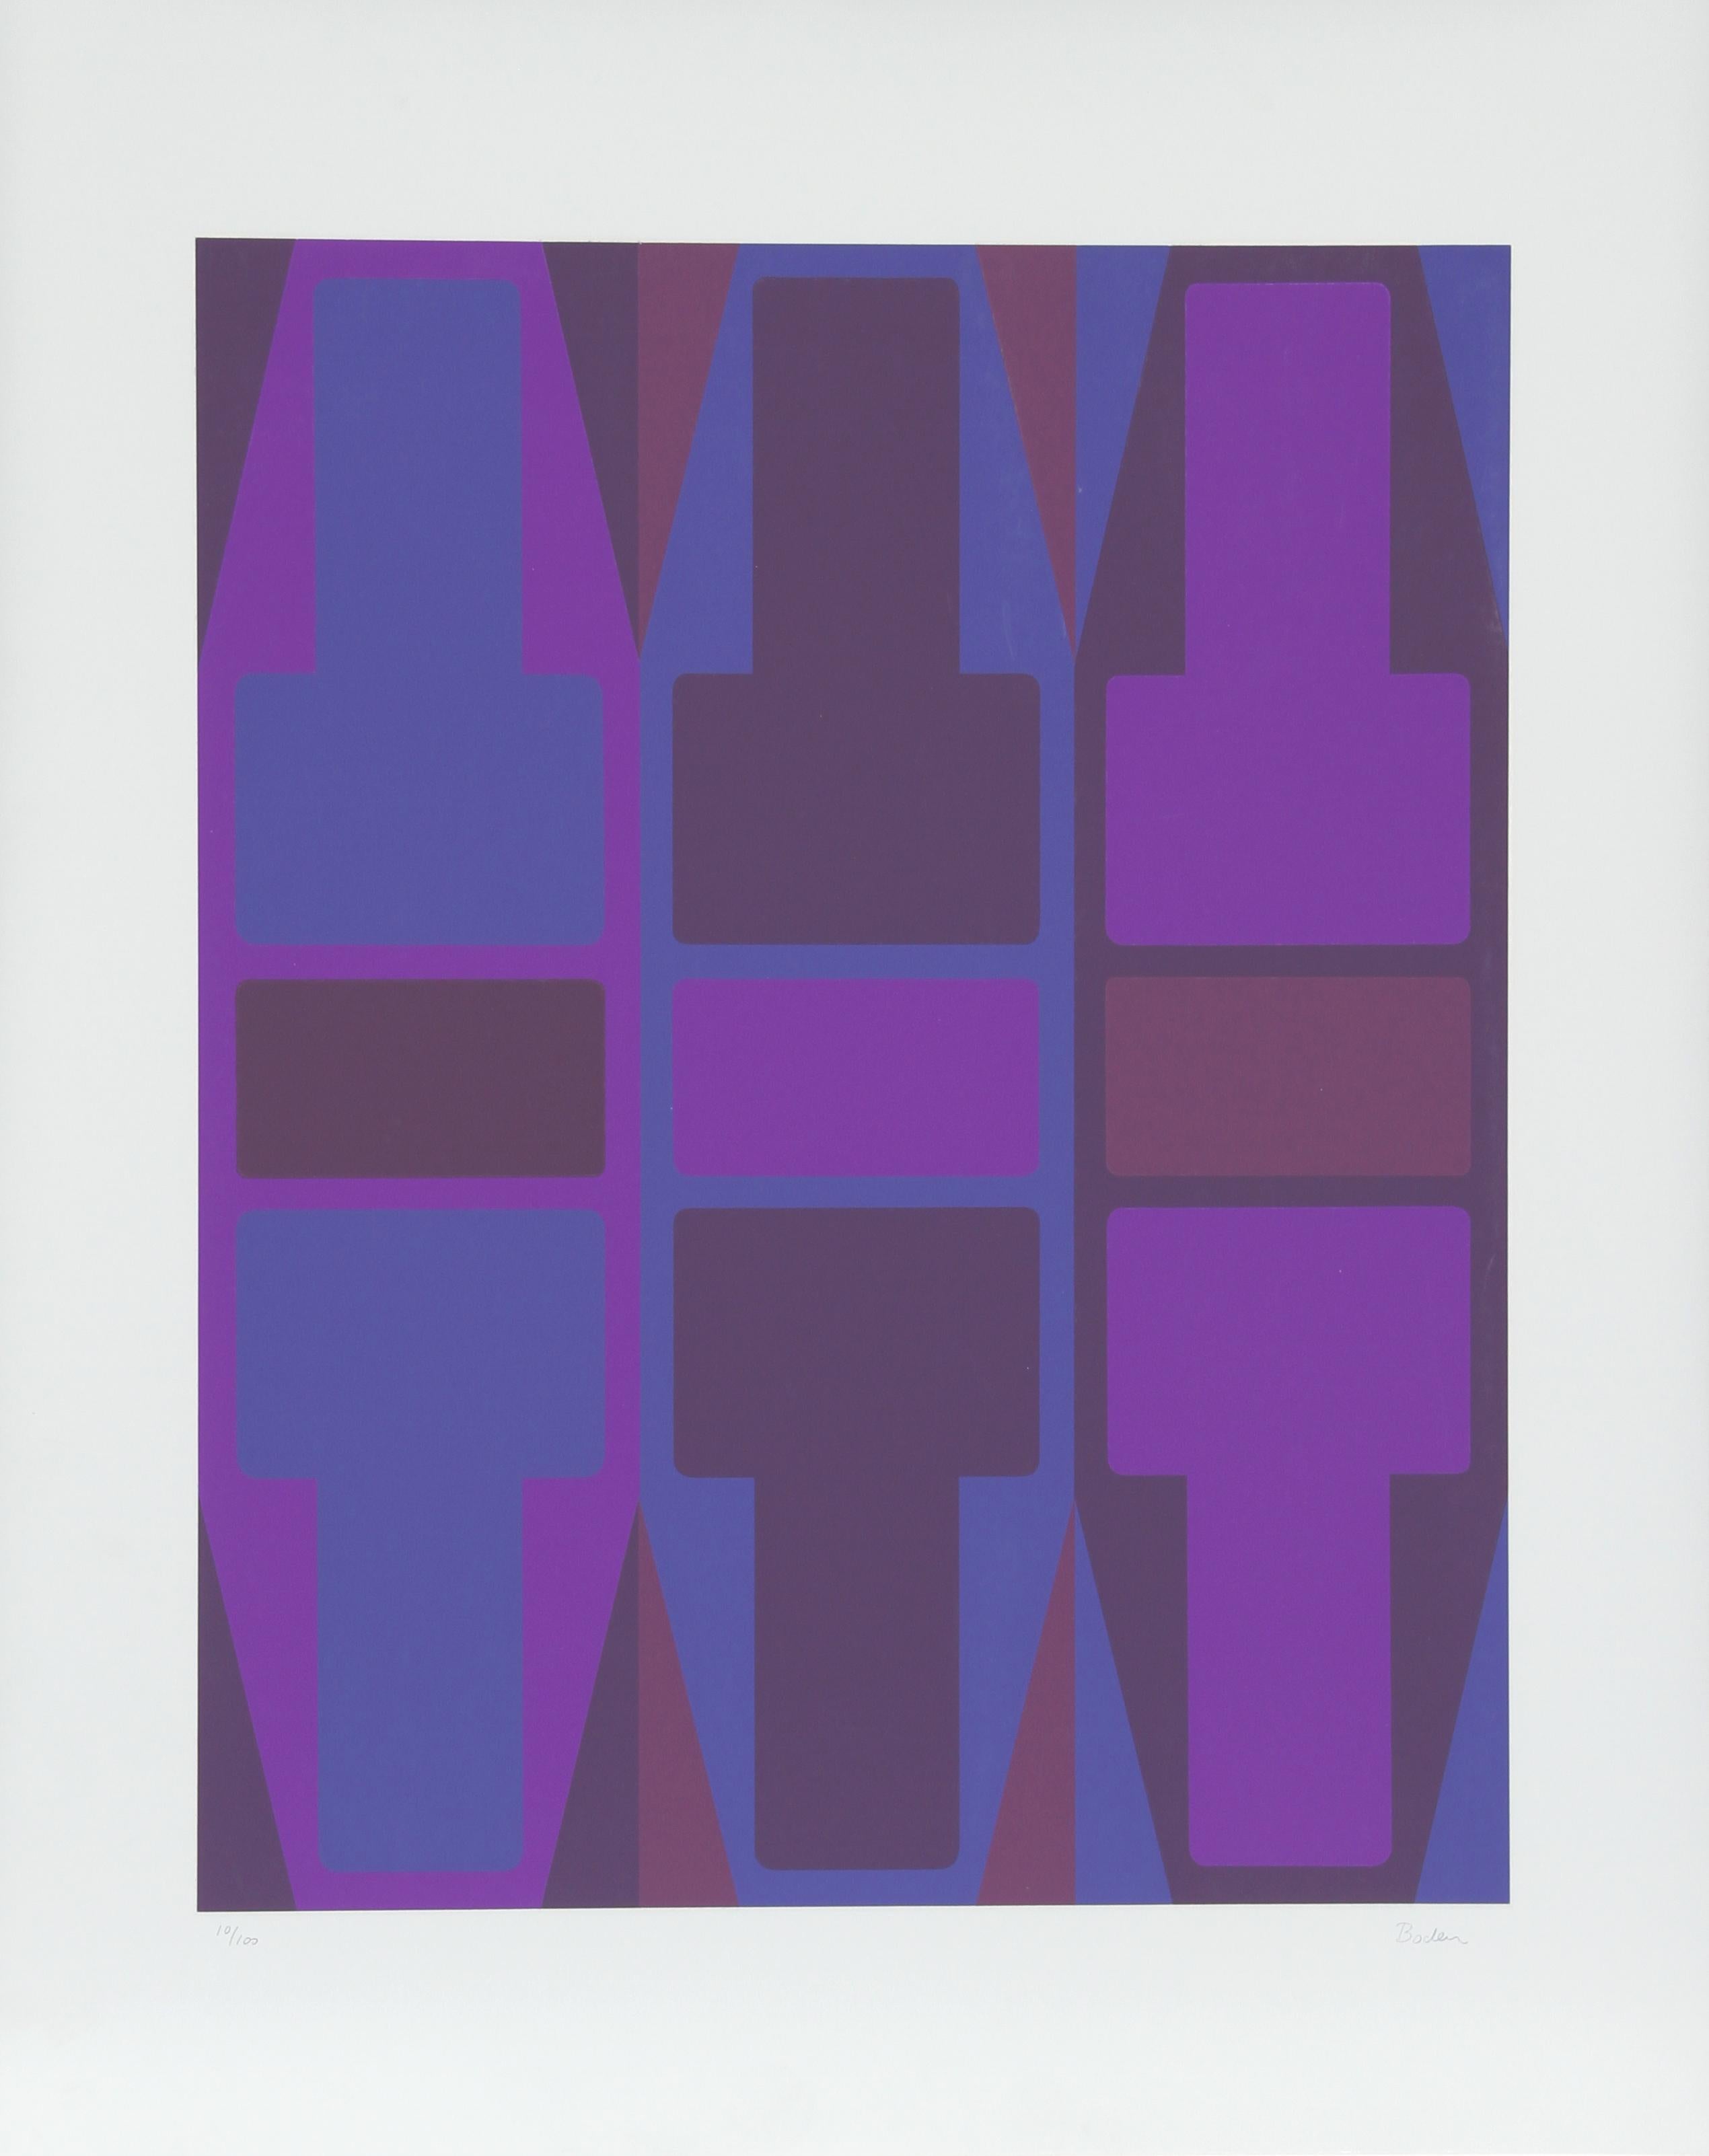 Artist: Arthur Boden, American
Title: T Series (Purple)
Year:  circa 1970
Medium:  Screenprint, signed and numbered in pencil
Edition:  100
Size:  29 in. x 23 in. (73.66 cm x 58.42 cm) 